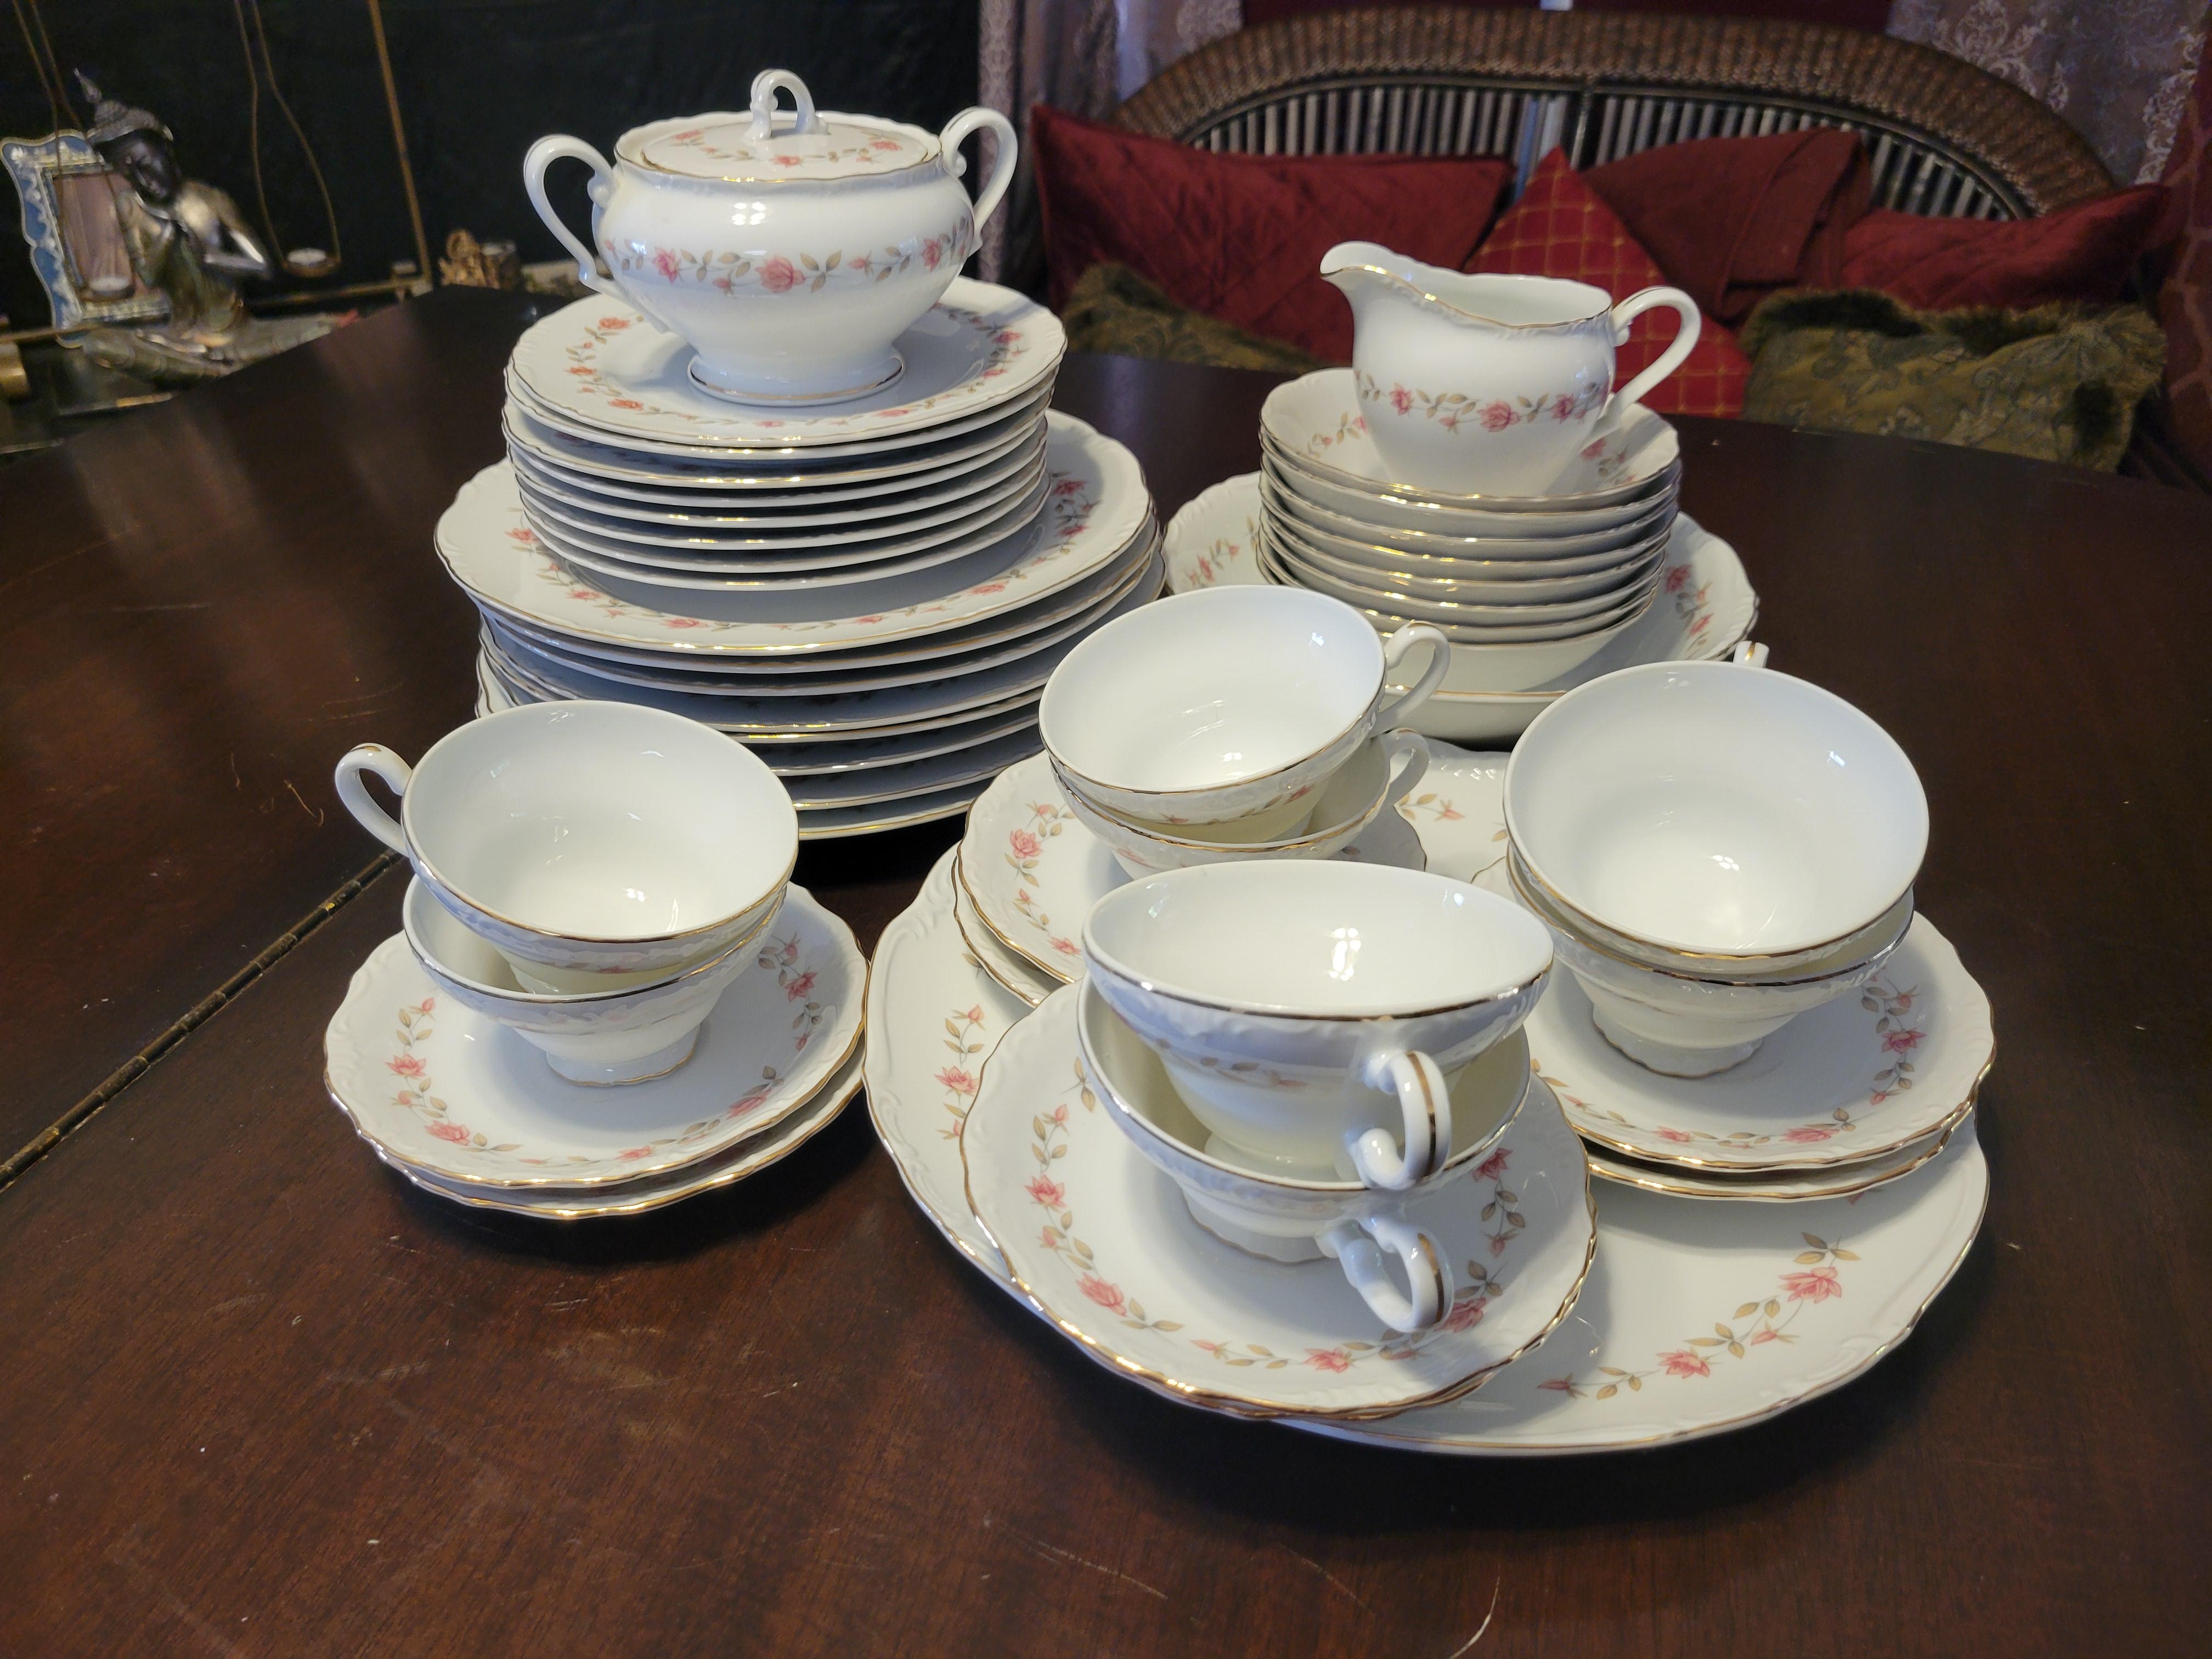 Vintage, Eternal Rose dining set. Made is Japan. 
The set consists of:
8 tea cups, 
8 saucers, 
8 snack plates - 7.5